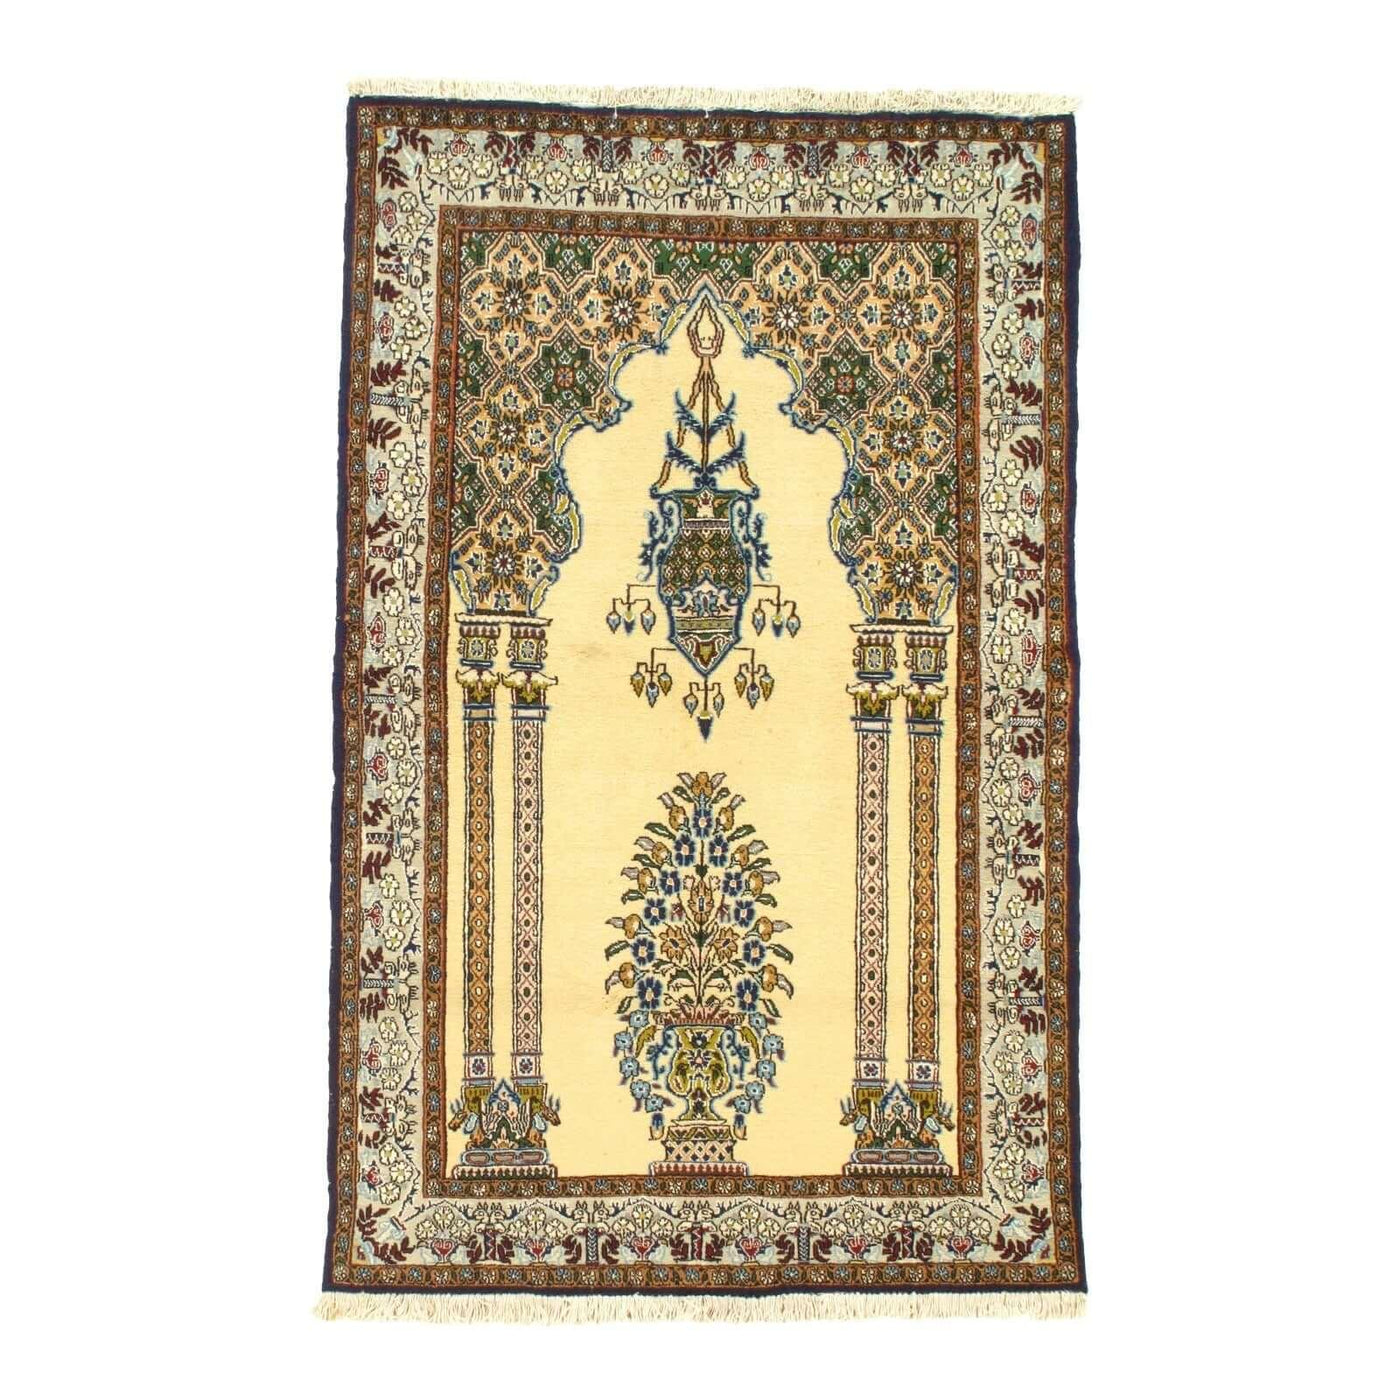 Canvello 1980s Persian Qum Ivory Wool Rug - 3'3" x 5'2"